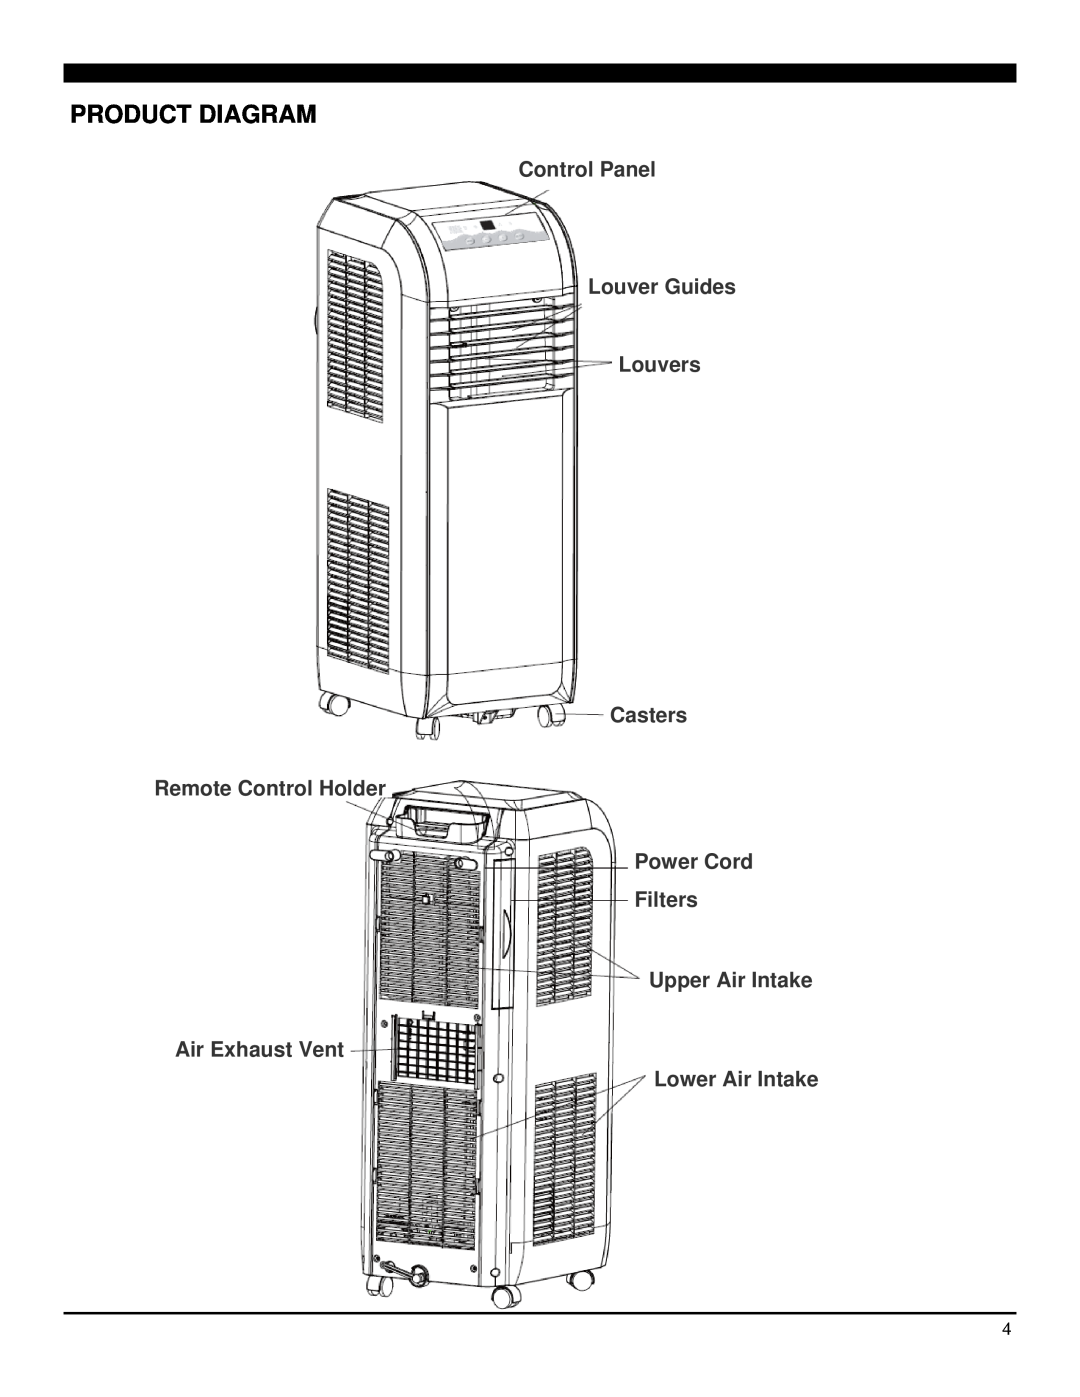 Soleus Air GL-PAC-08E4 Product Diagram, Control Panel Louver Guides Louvers Casters, Upper Air Intake Air Exhaust Vent 